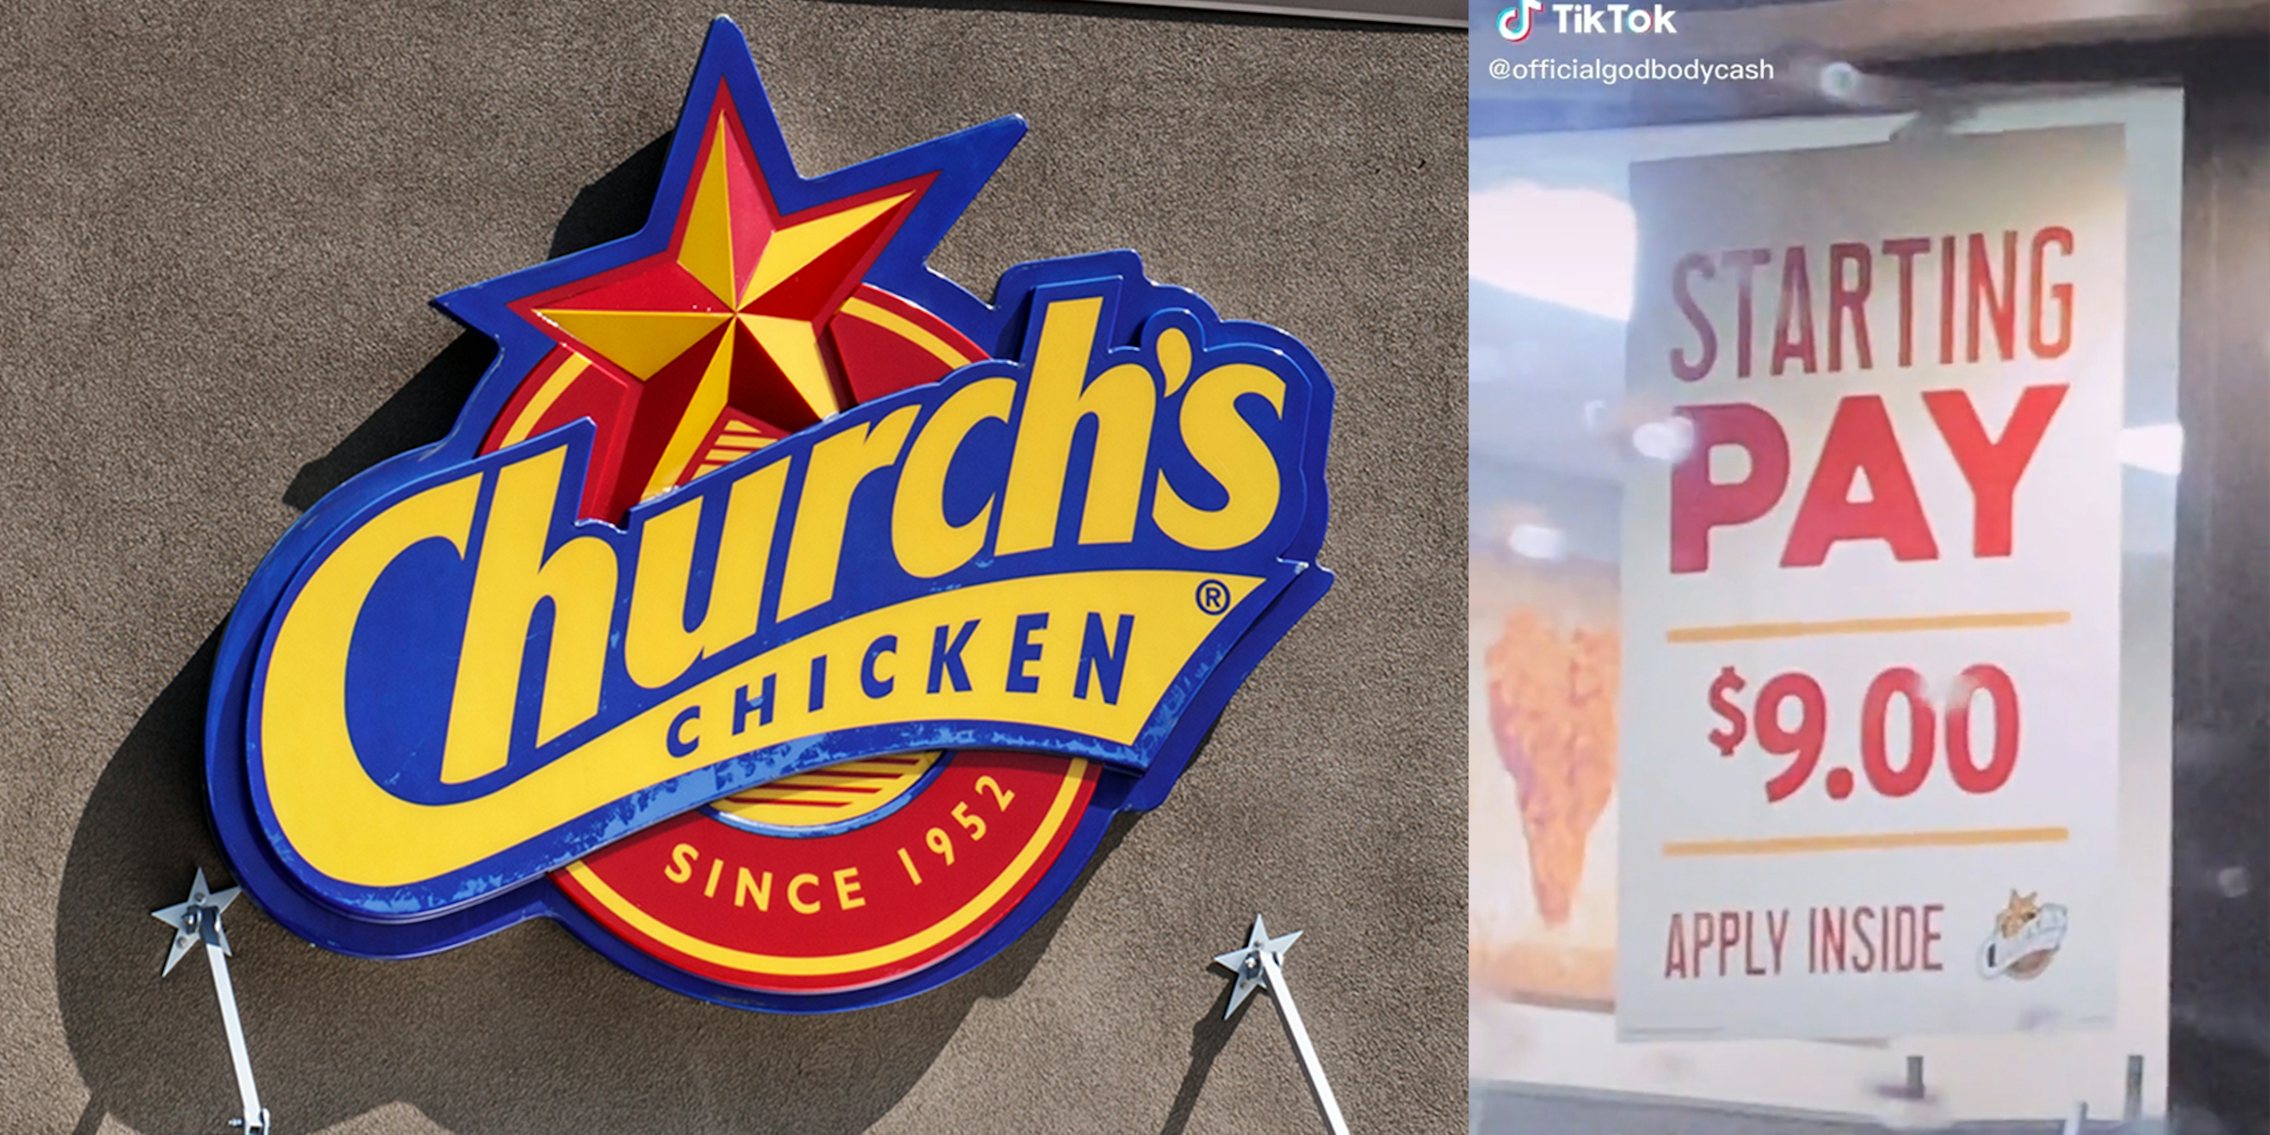 Church's Chicken sign (l) 'Starting pay $9.00 Apply inside' sign